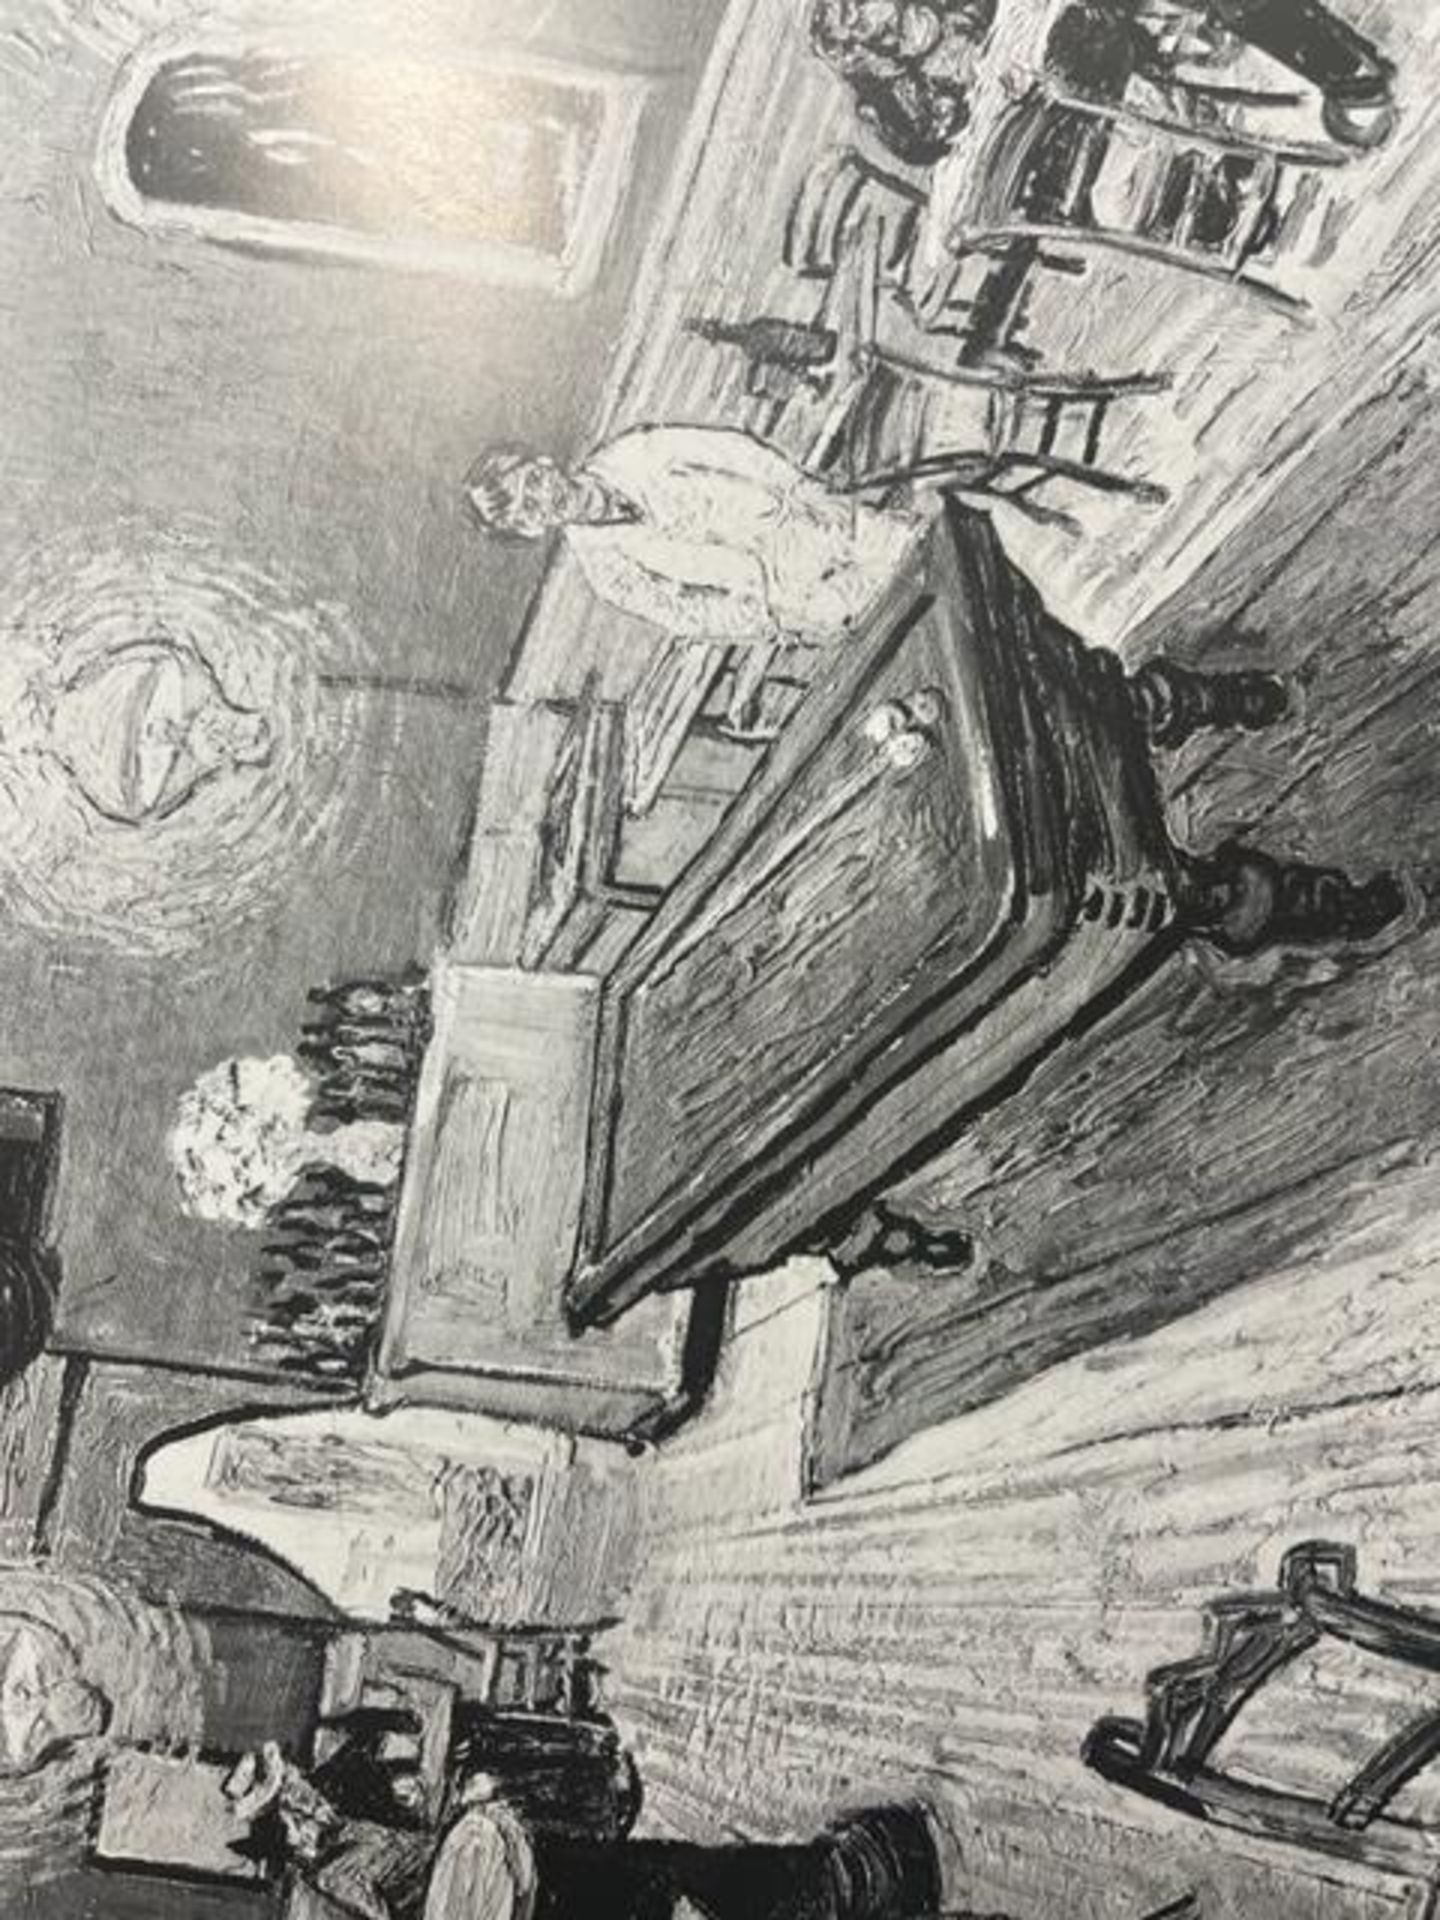 Vincent van Gogh "The Night Cafe" Print. - Image 6 of 6